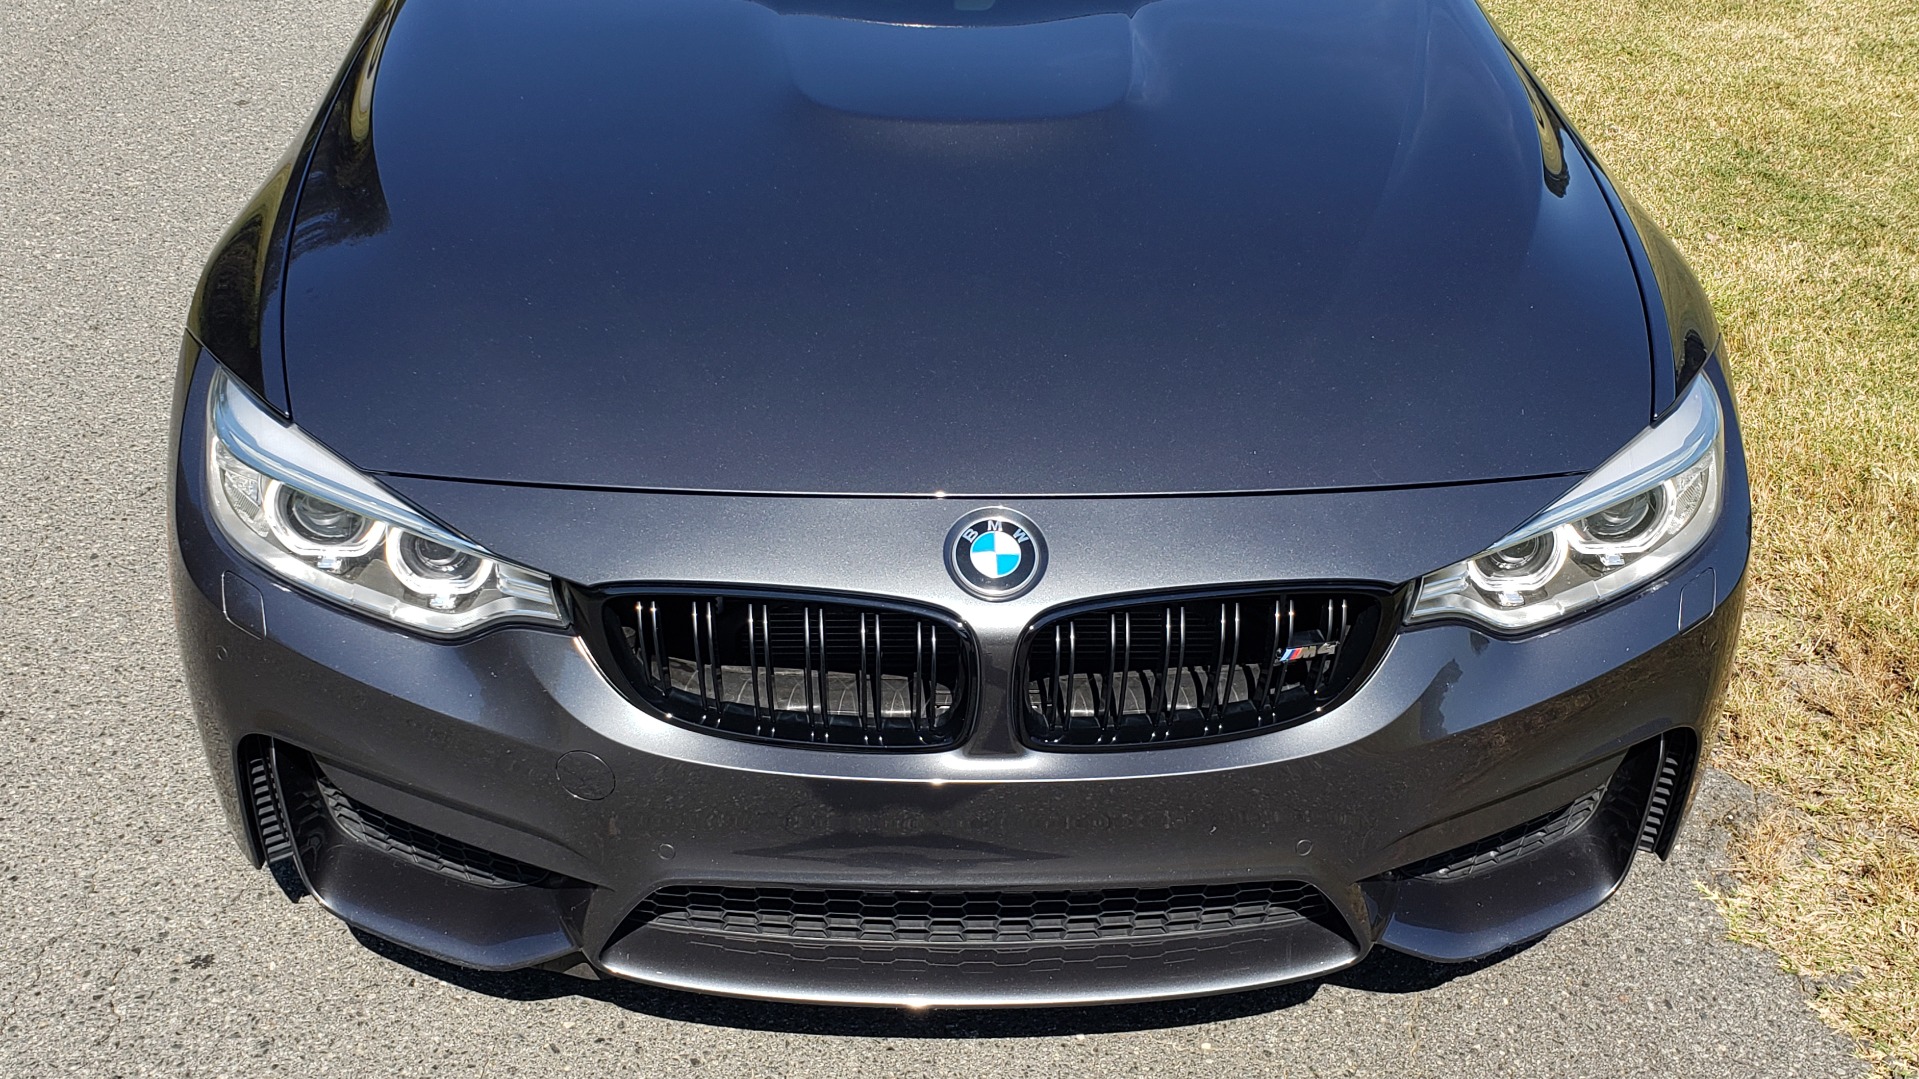 Used 2015 BMW M4 COUPE / EXEC PKG / ADAPT M SUSP / CF ROOF / NAV / REARVIEW for sale Sold at Formula Imports in Charlotte NC 28227 22